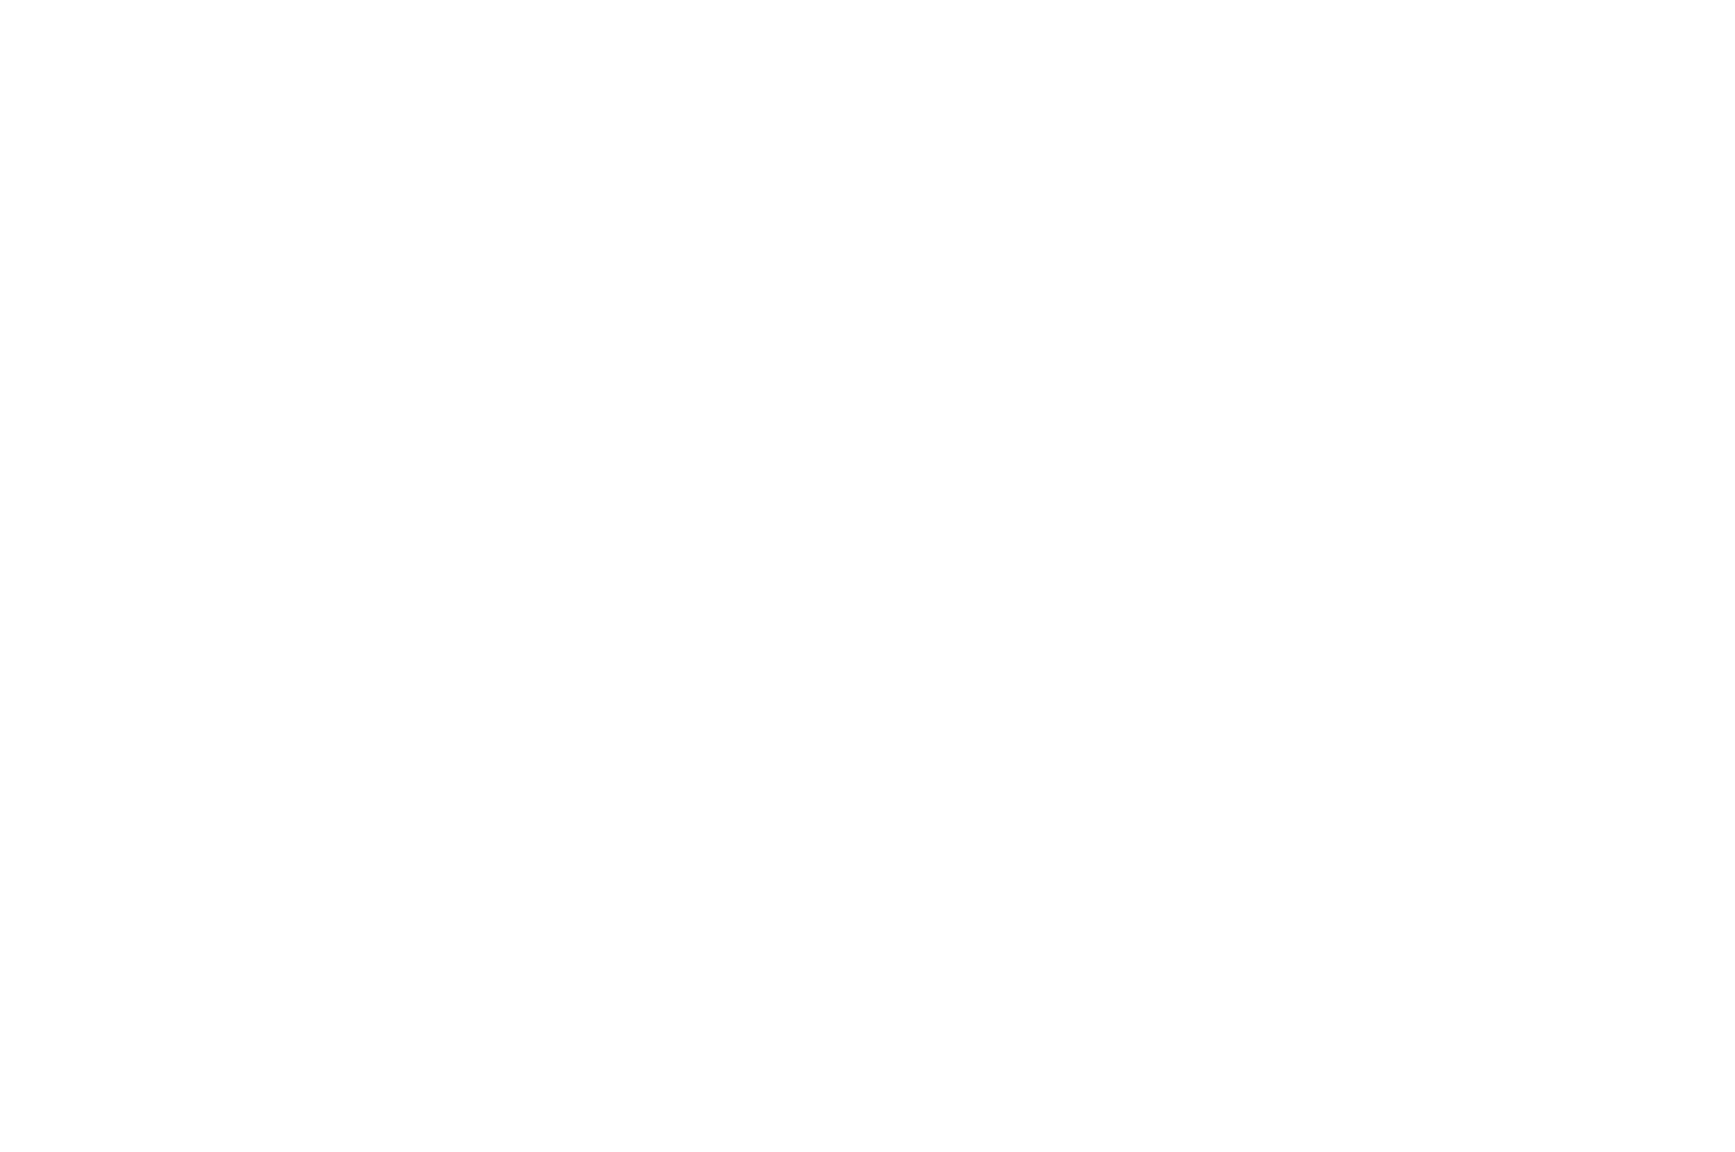 OFFICIAL SELECTION - BFI South East filmmakers competion - 2018.png